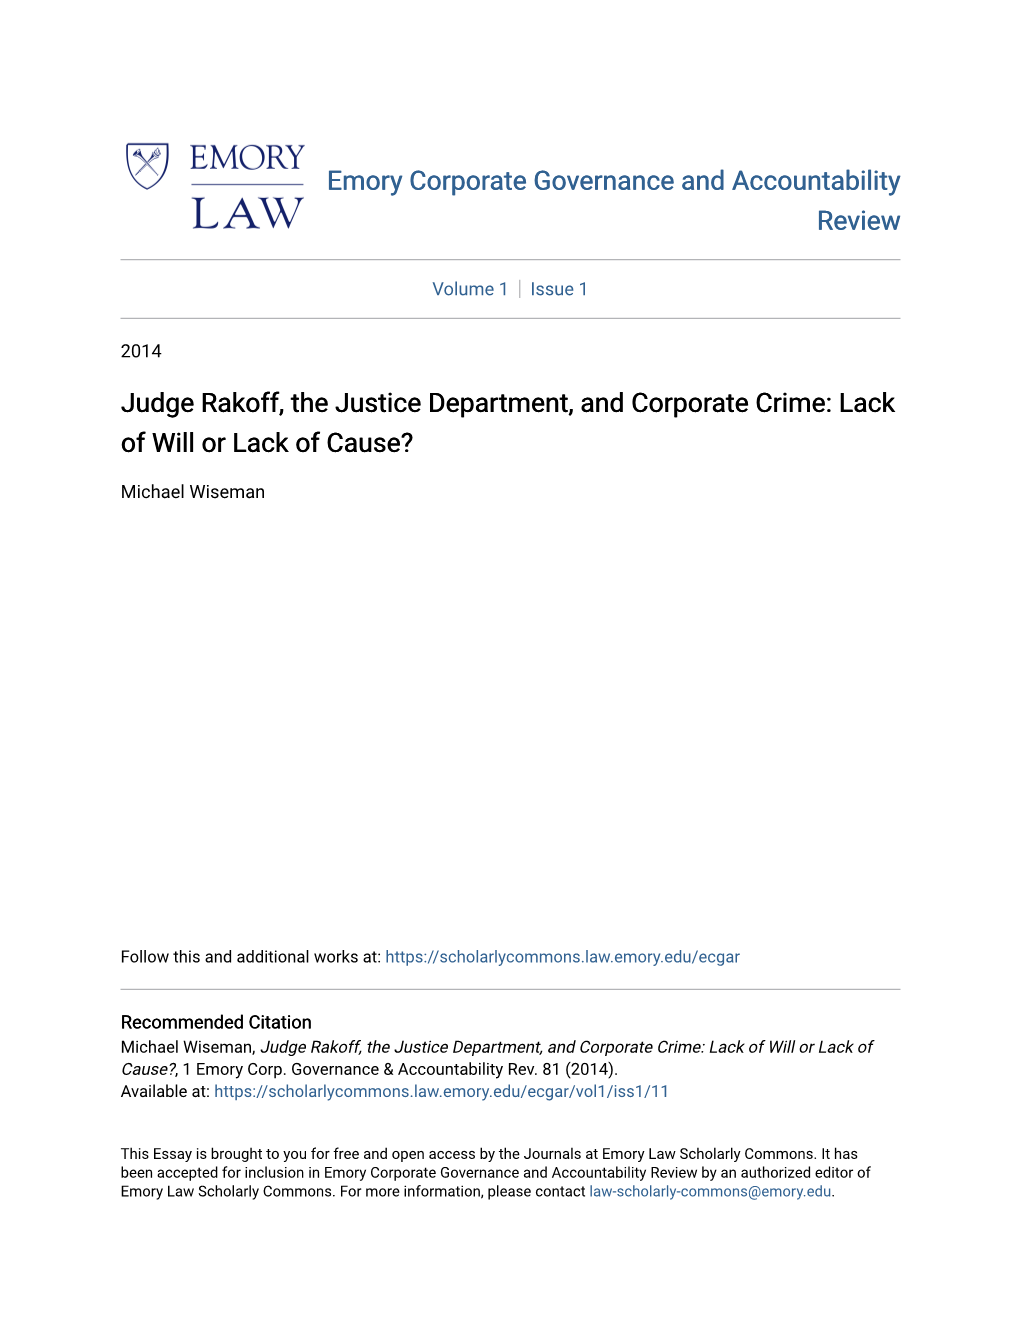 Judge Rakoff, the Justice Department, and Corporate Crime: Lack of Will Or Lack of Cause?